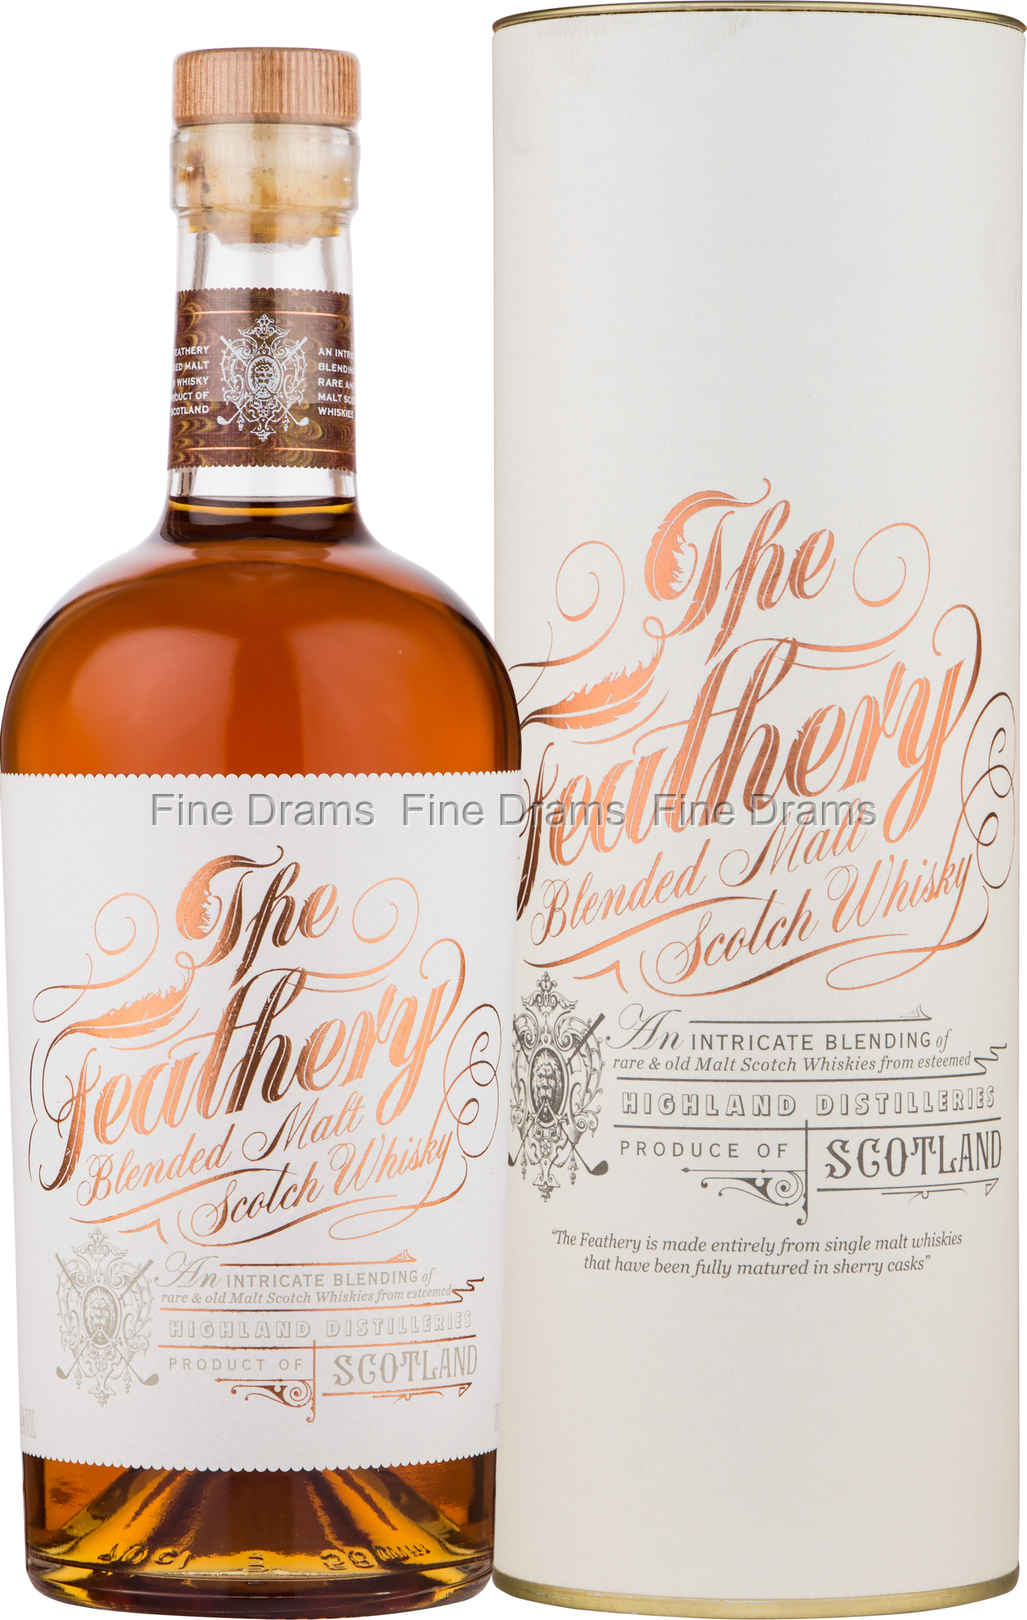 The Feathery Blended Scotch Whisky - Taster's Club